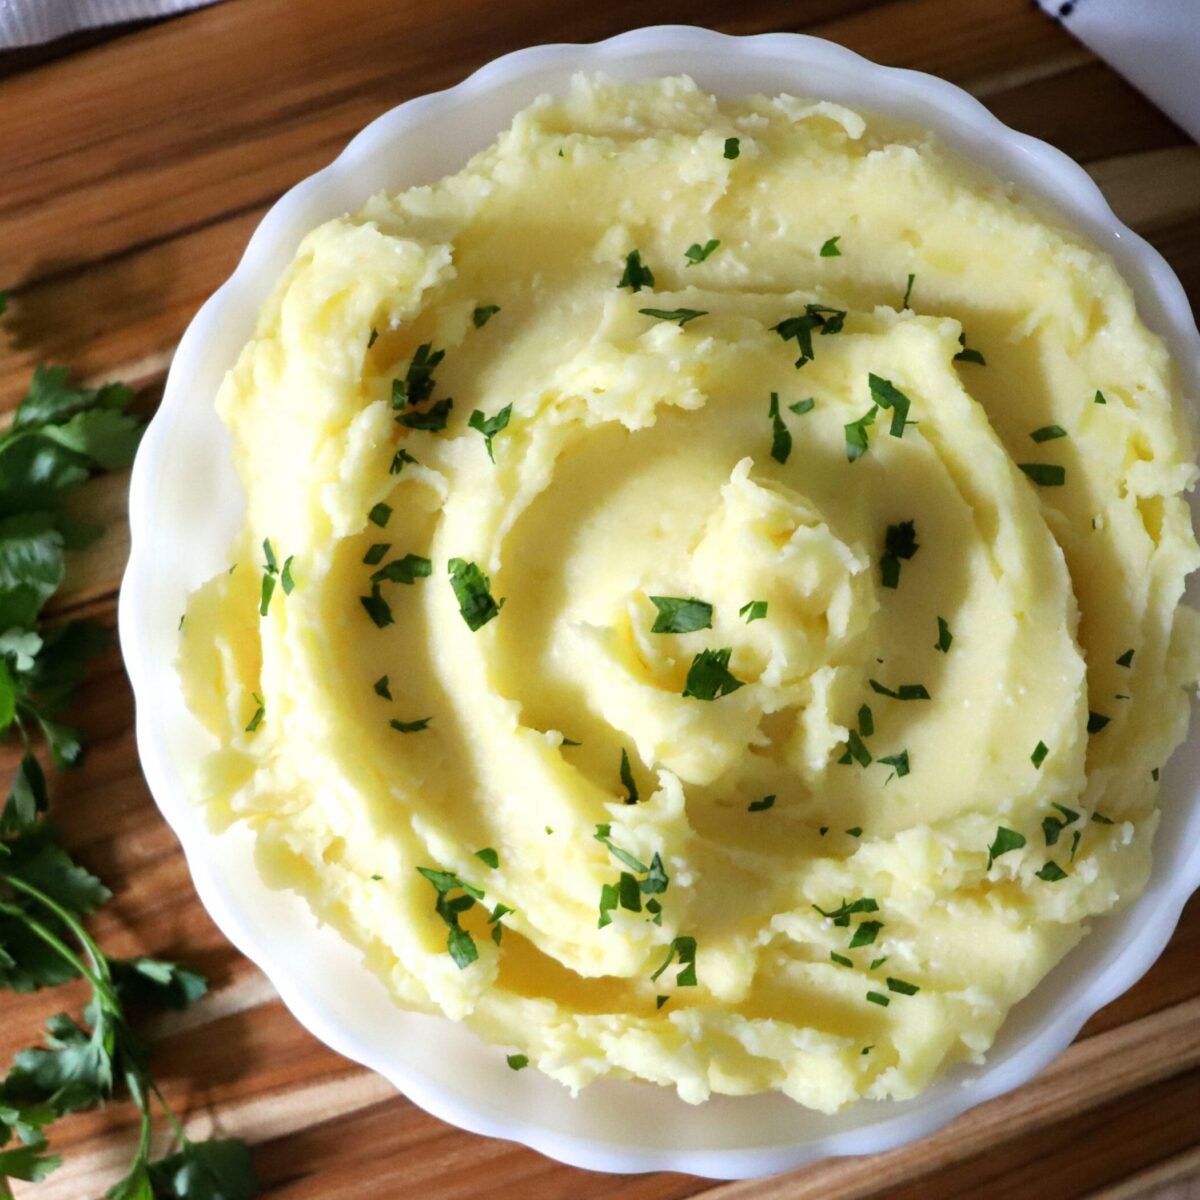 Mashed Potatoes in a bowl.